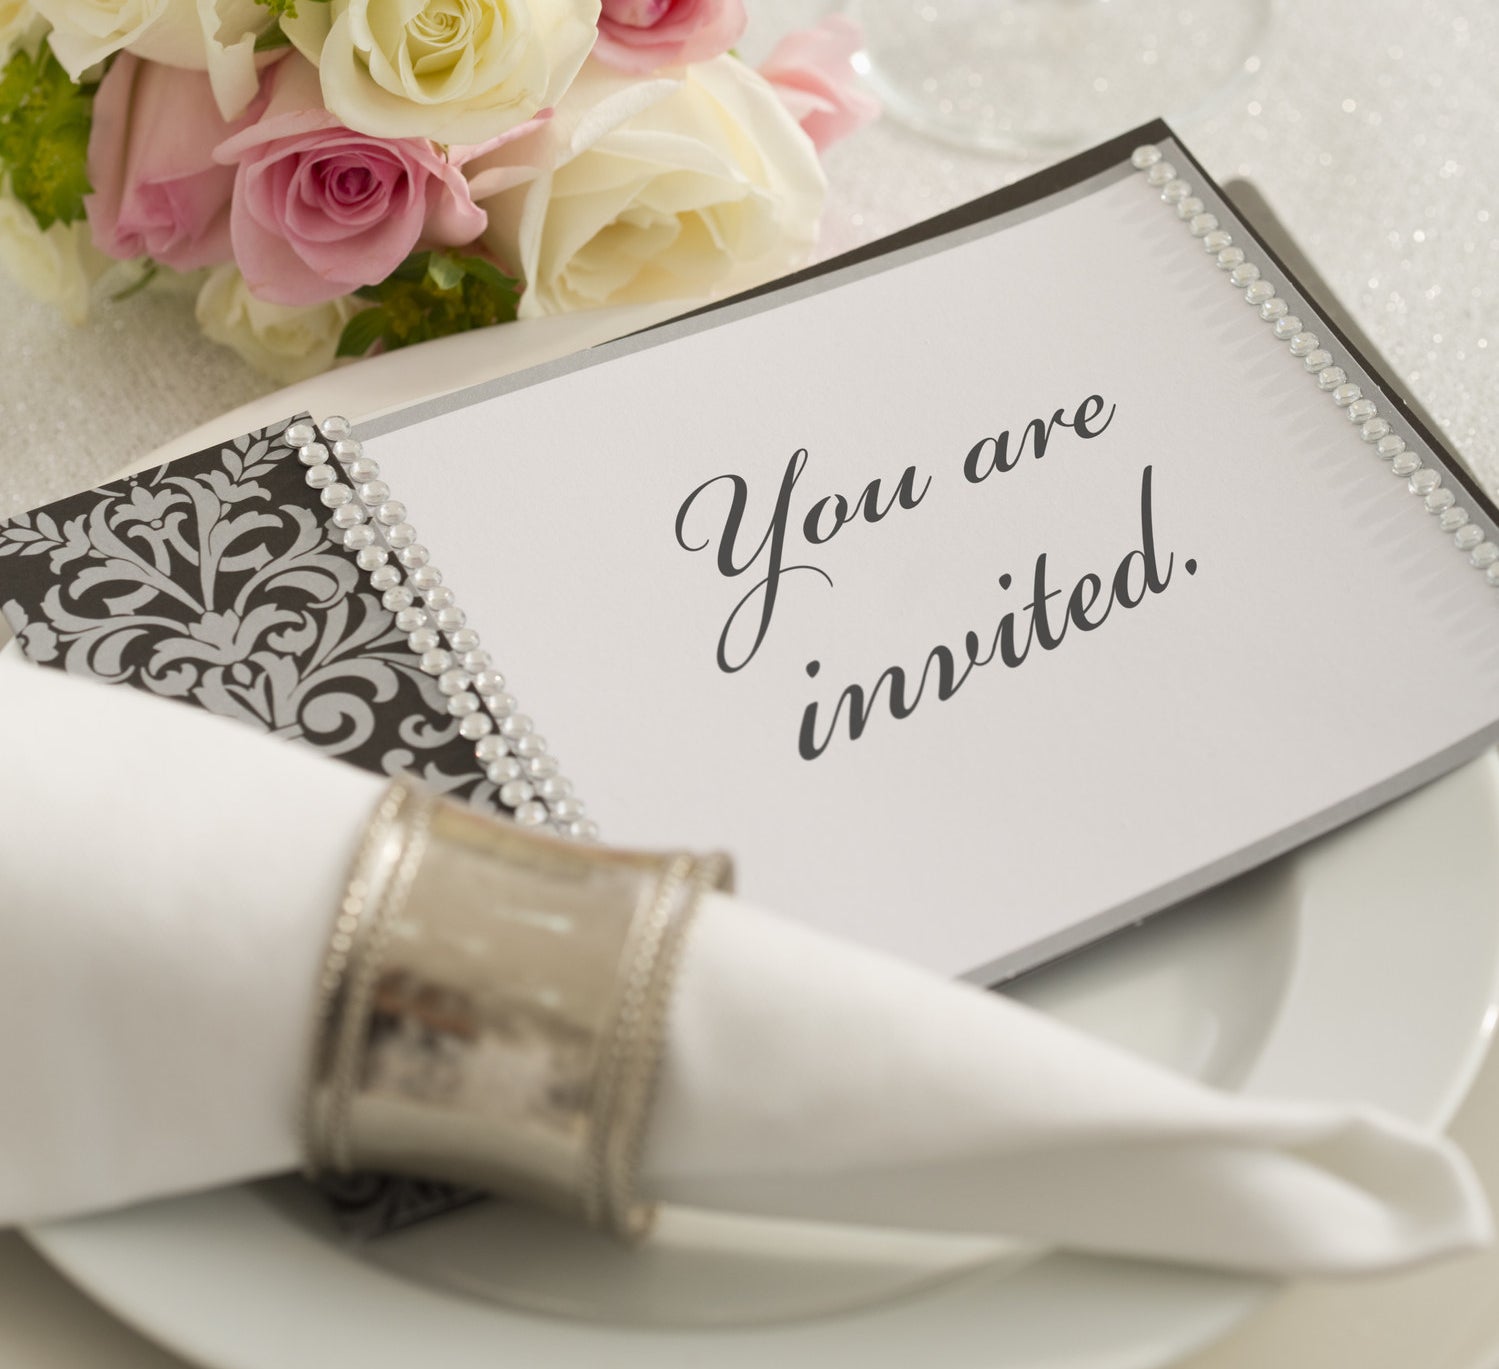 a table setting with an invite on the plate